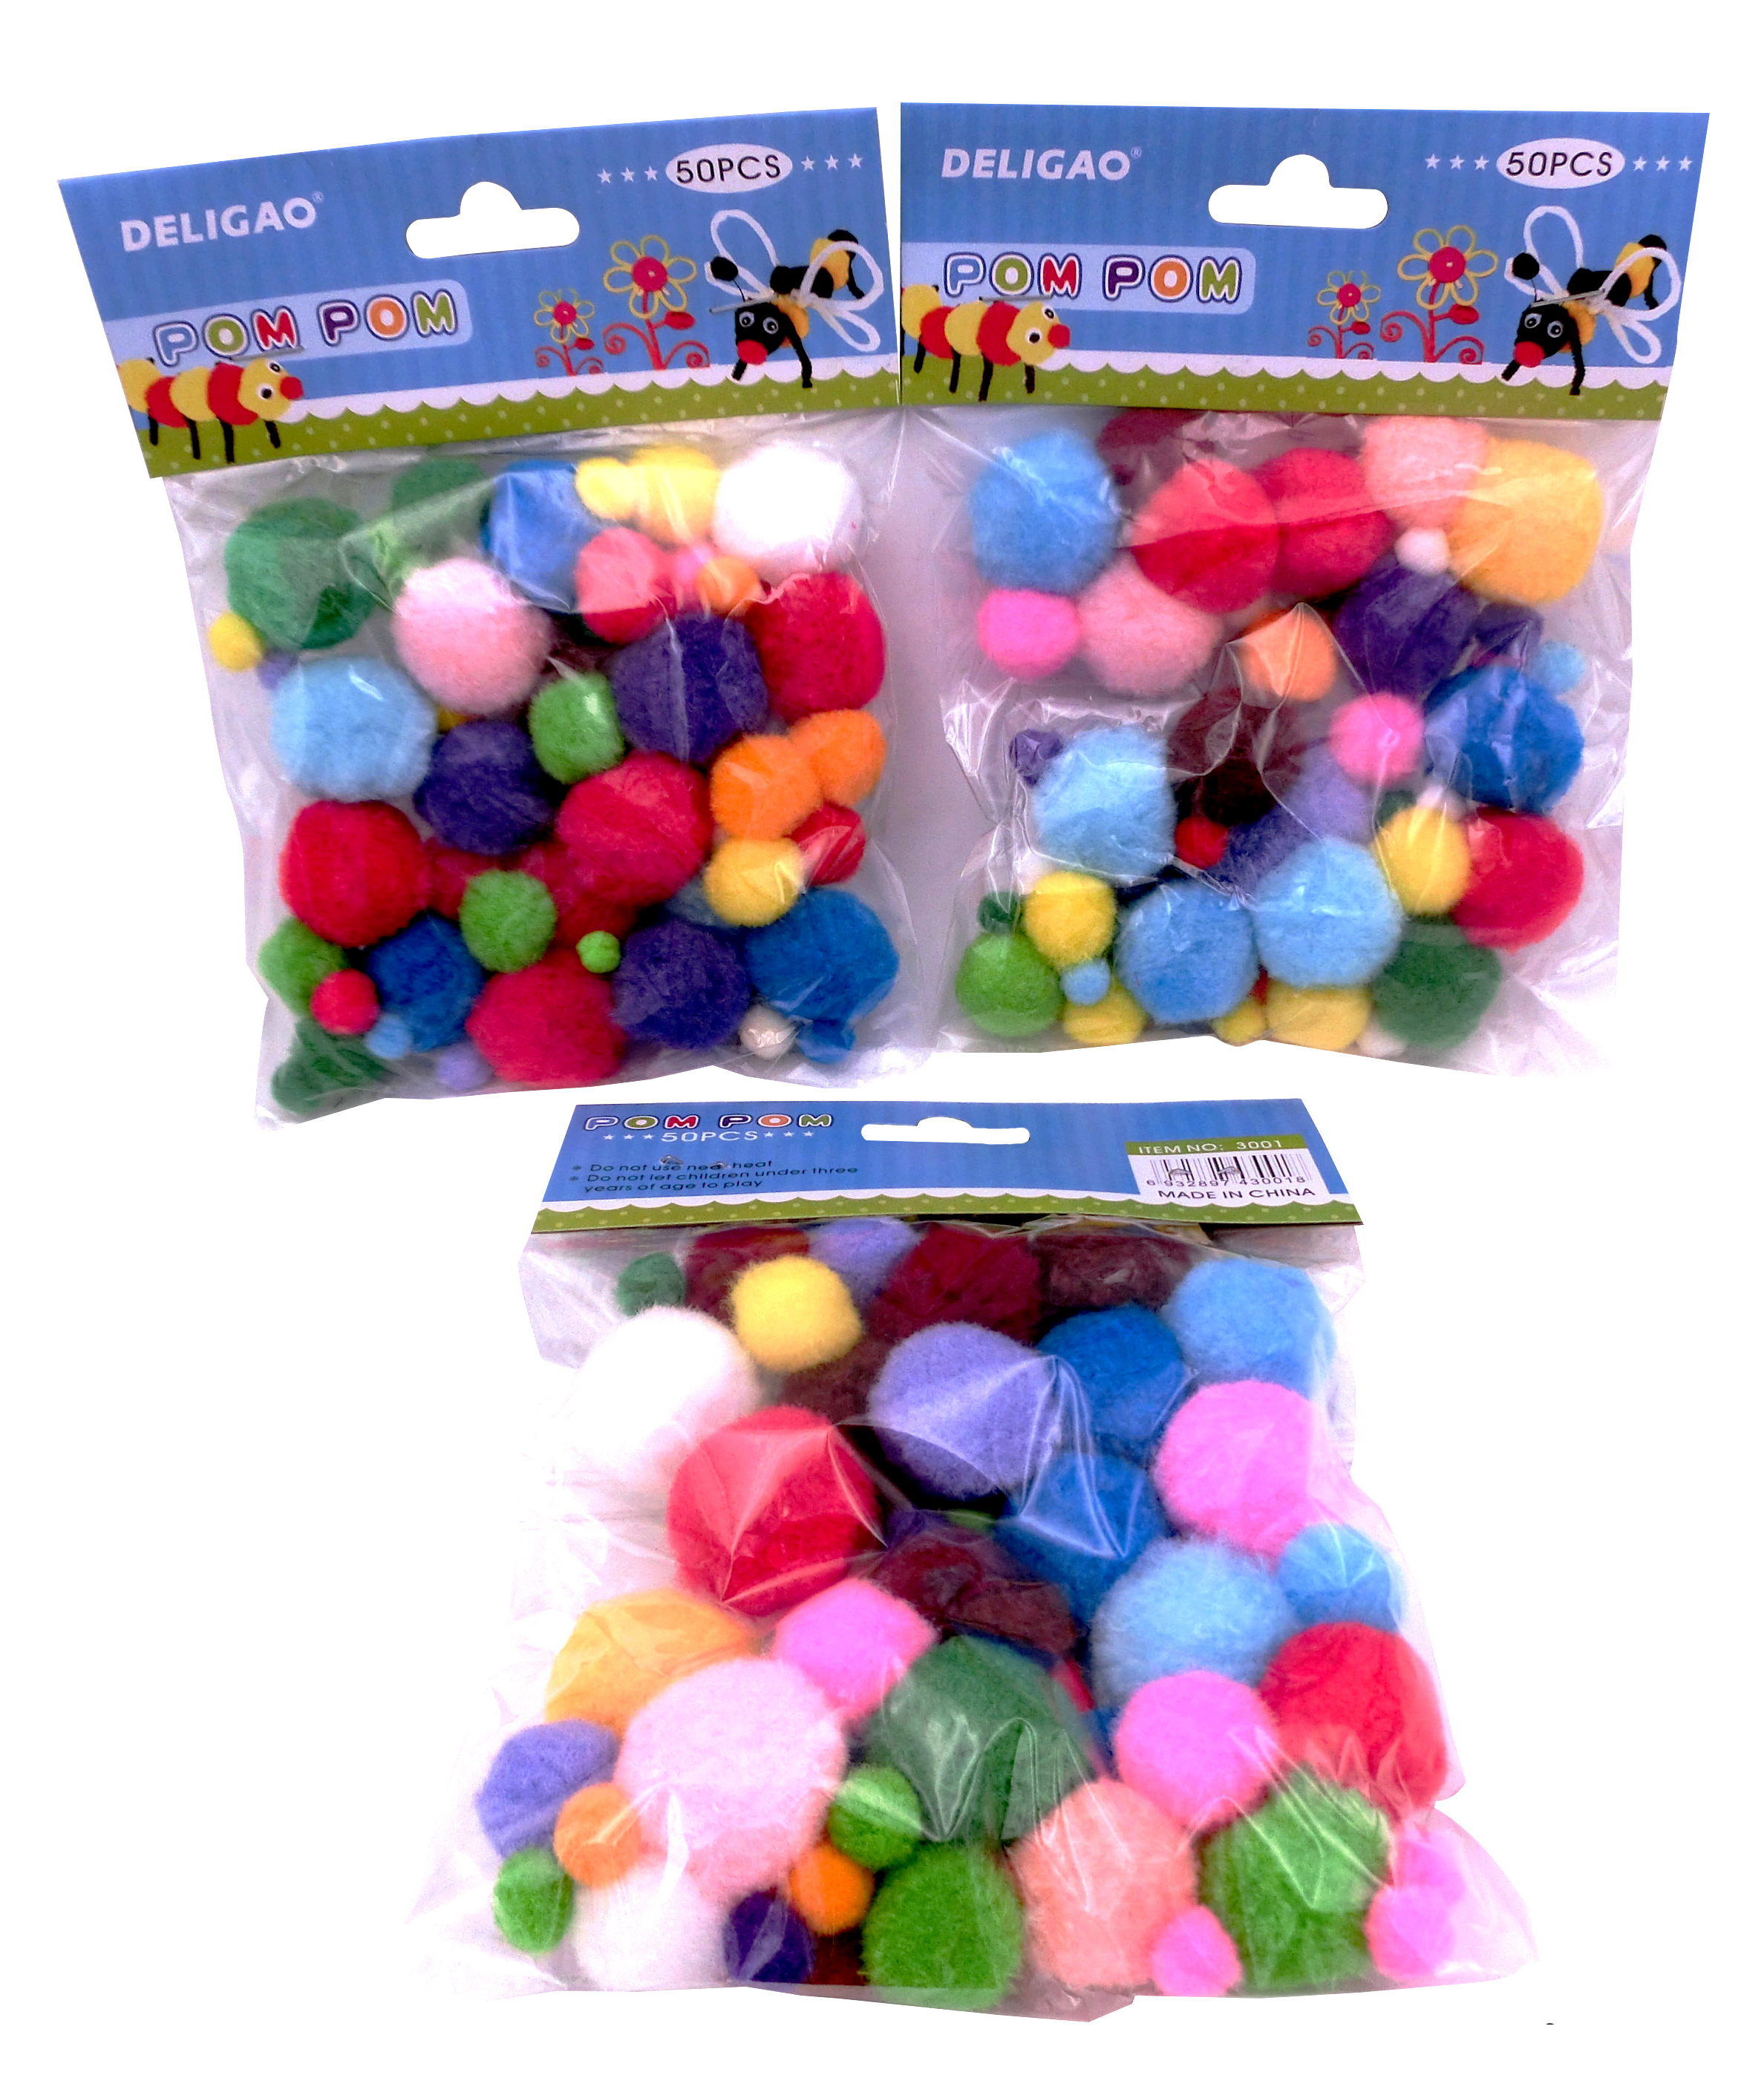 500Pcs 2.5cm Pom Poms Colorful Pompoms for Craft Making DIY Creative Crafts Decorations Kids Craft Project Home Party Decorations 